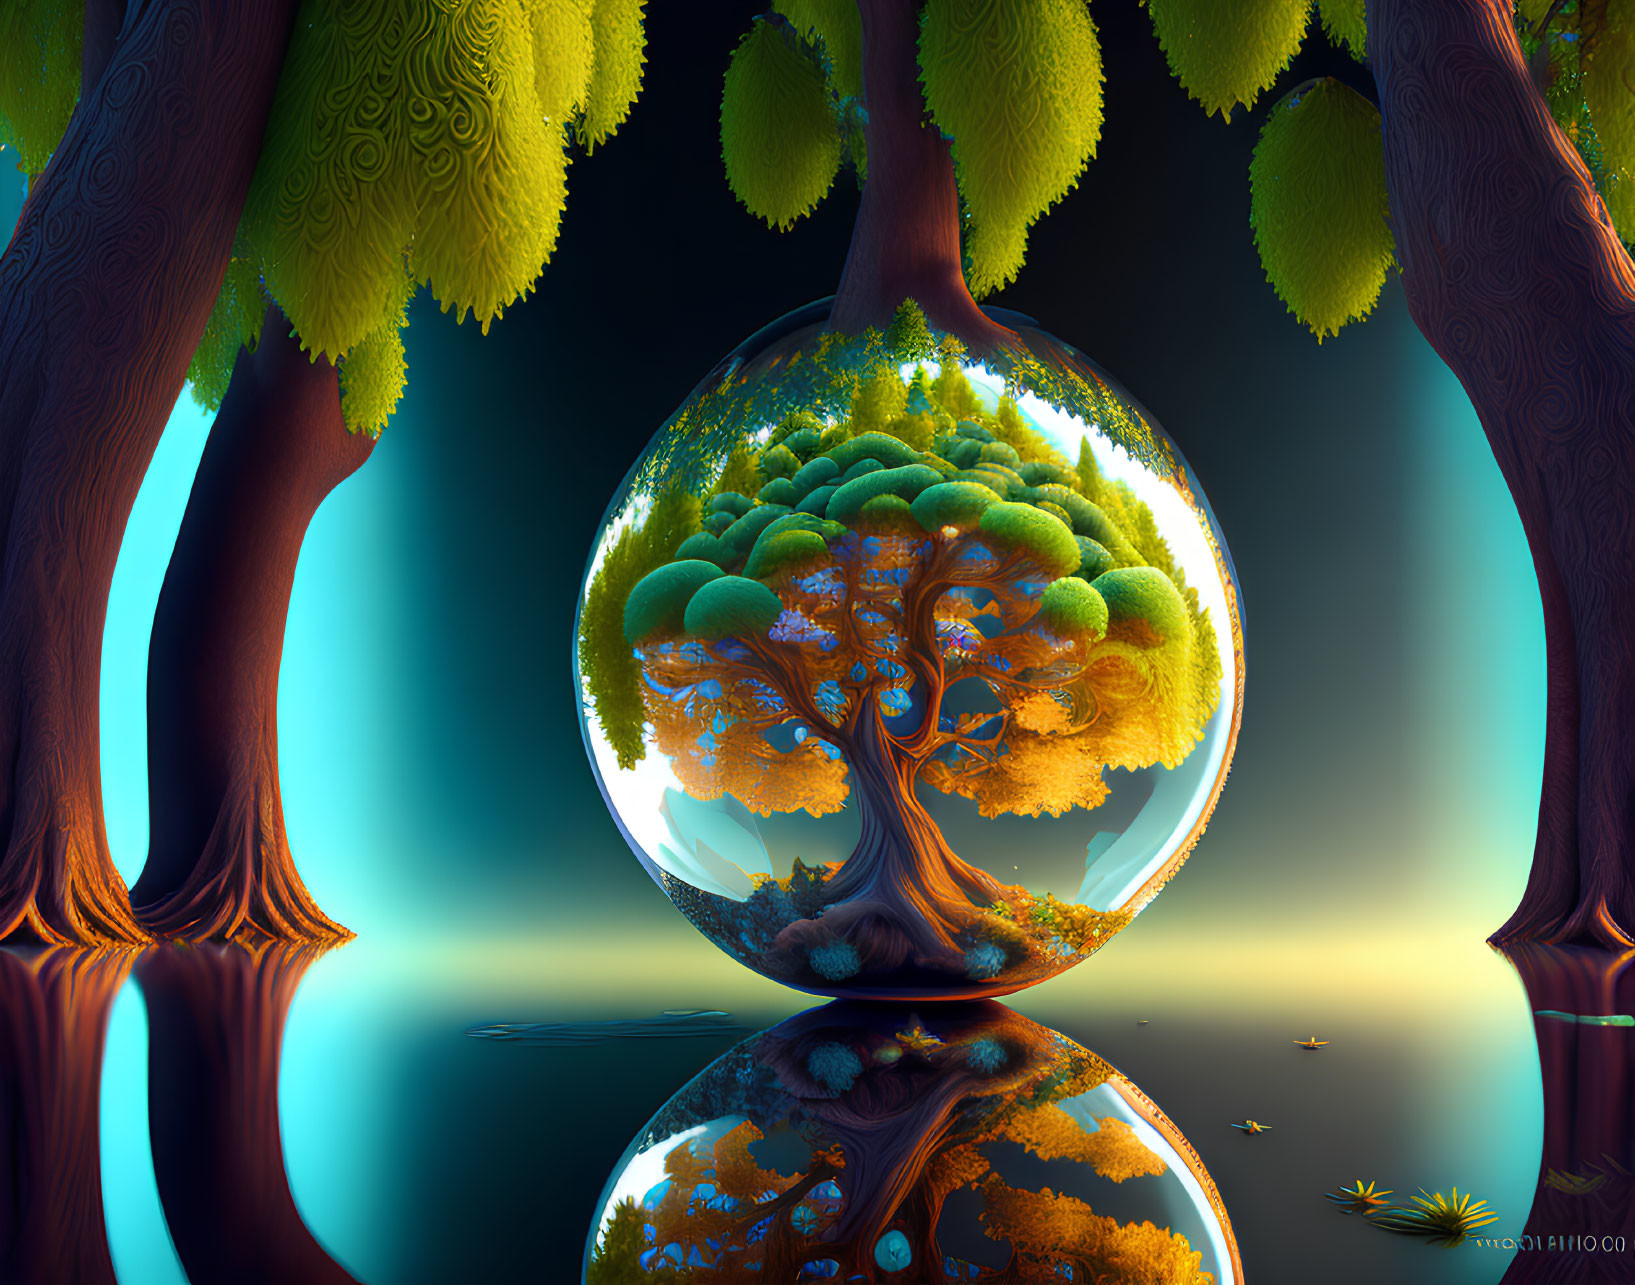 Fantastical landscape with oversized tree in transparent sphere surrounded by towering trees reflected in calm water